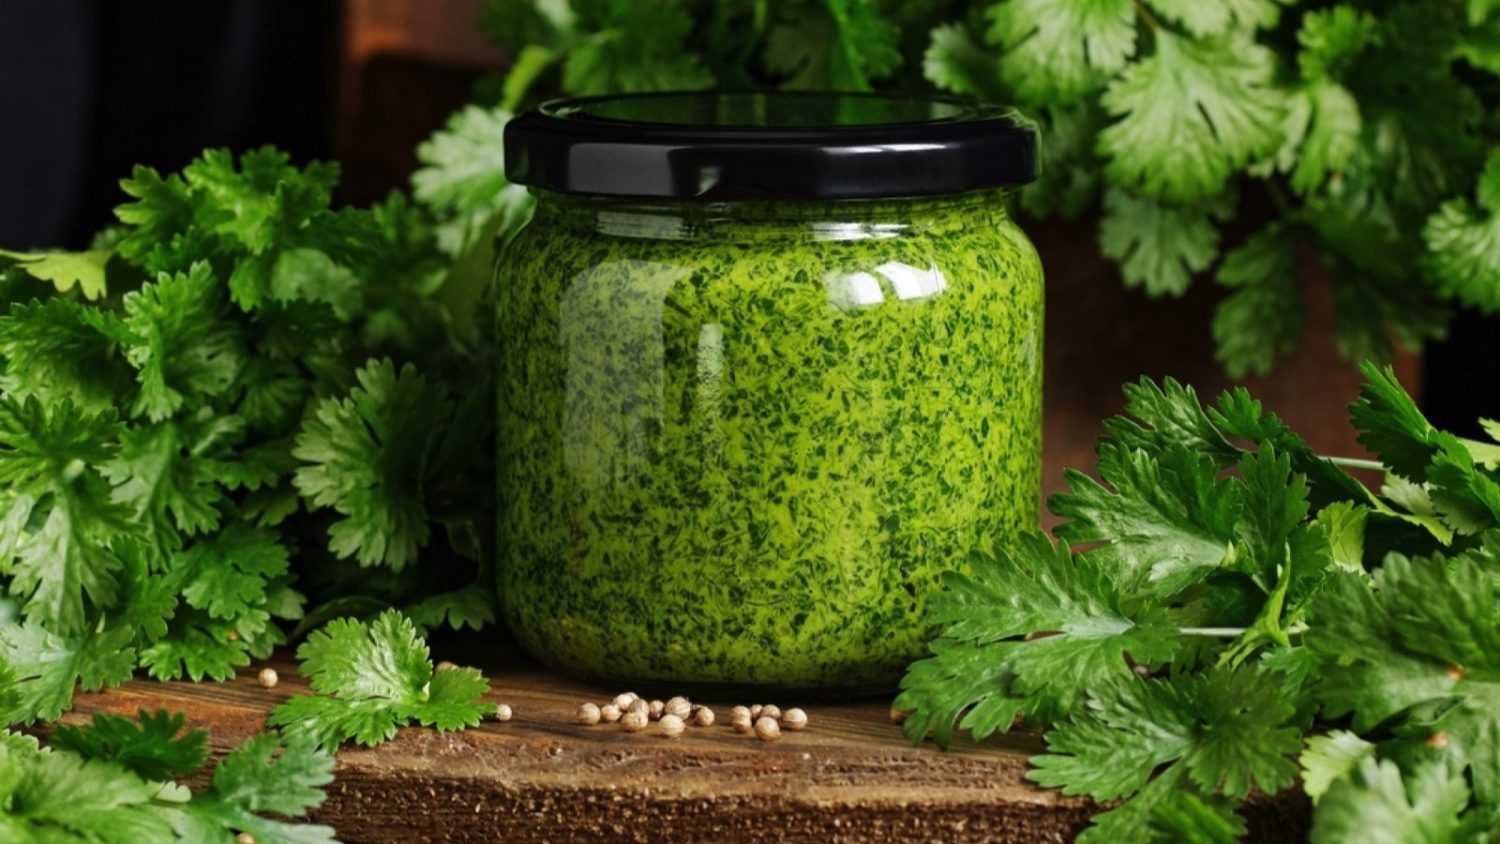 Green pesto with coriander herb on rustic wooden dark background, clloseup, copy space, italian dip food and dressing, homemade food concept